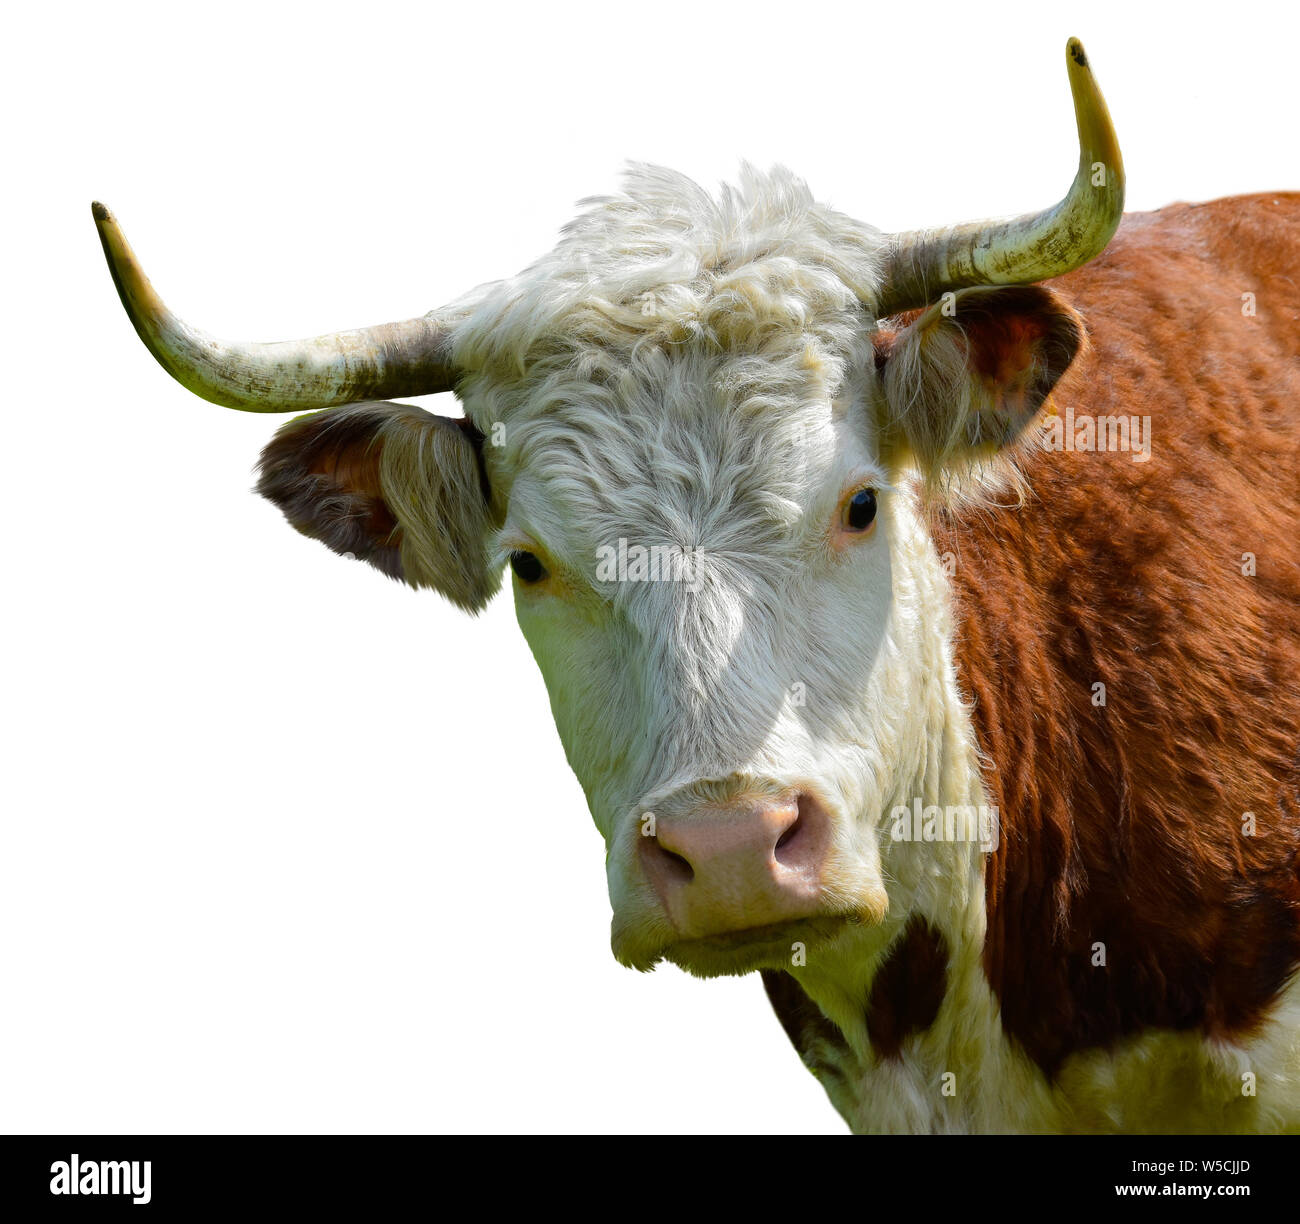 Cow bull head isolated on white background Stock Photo